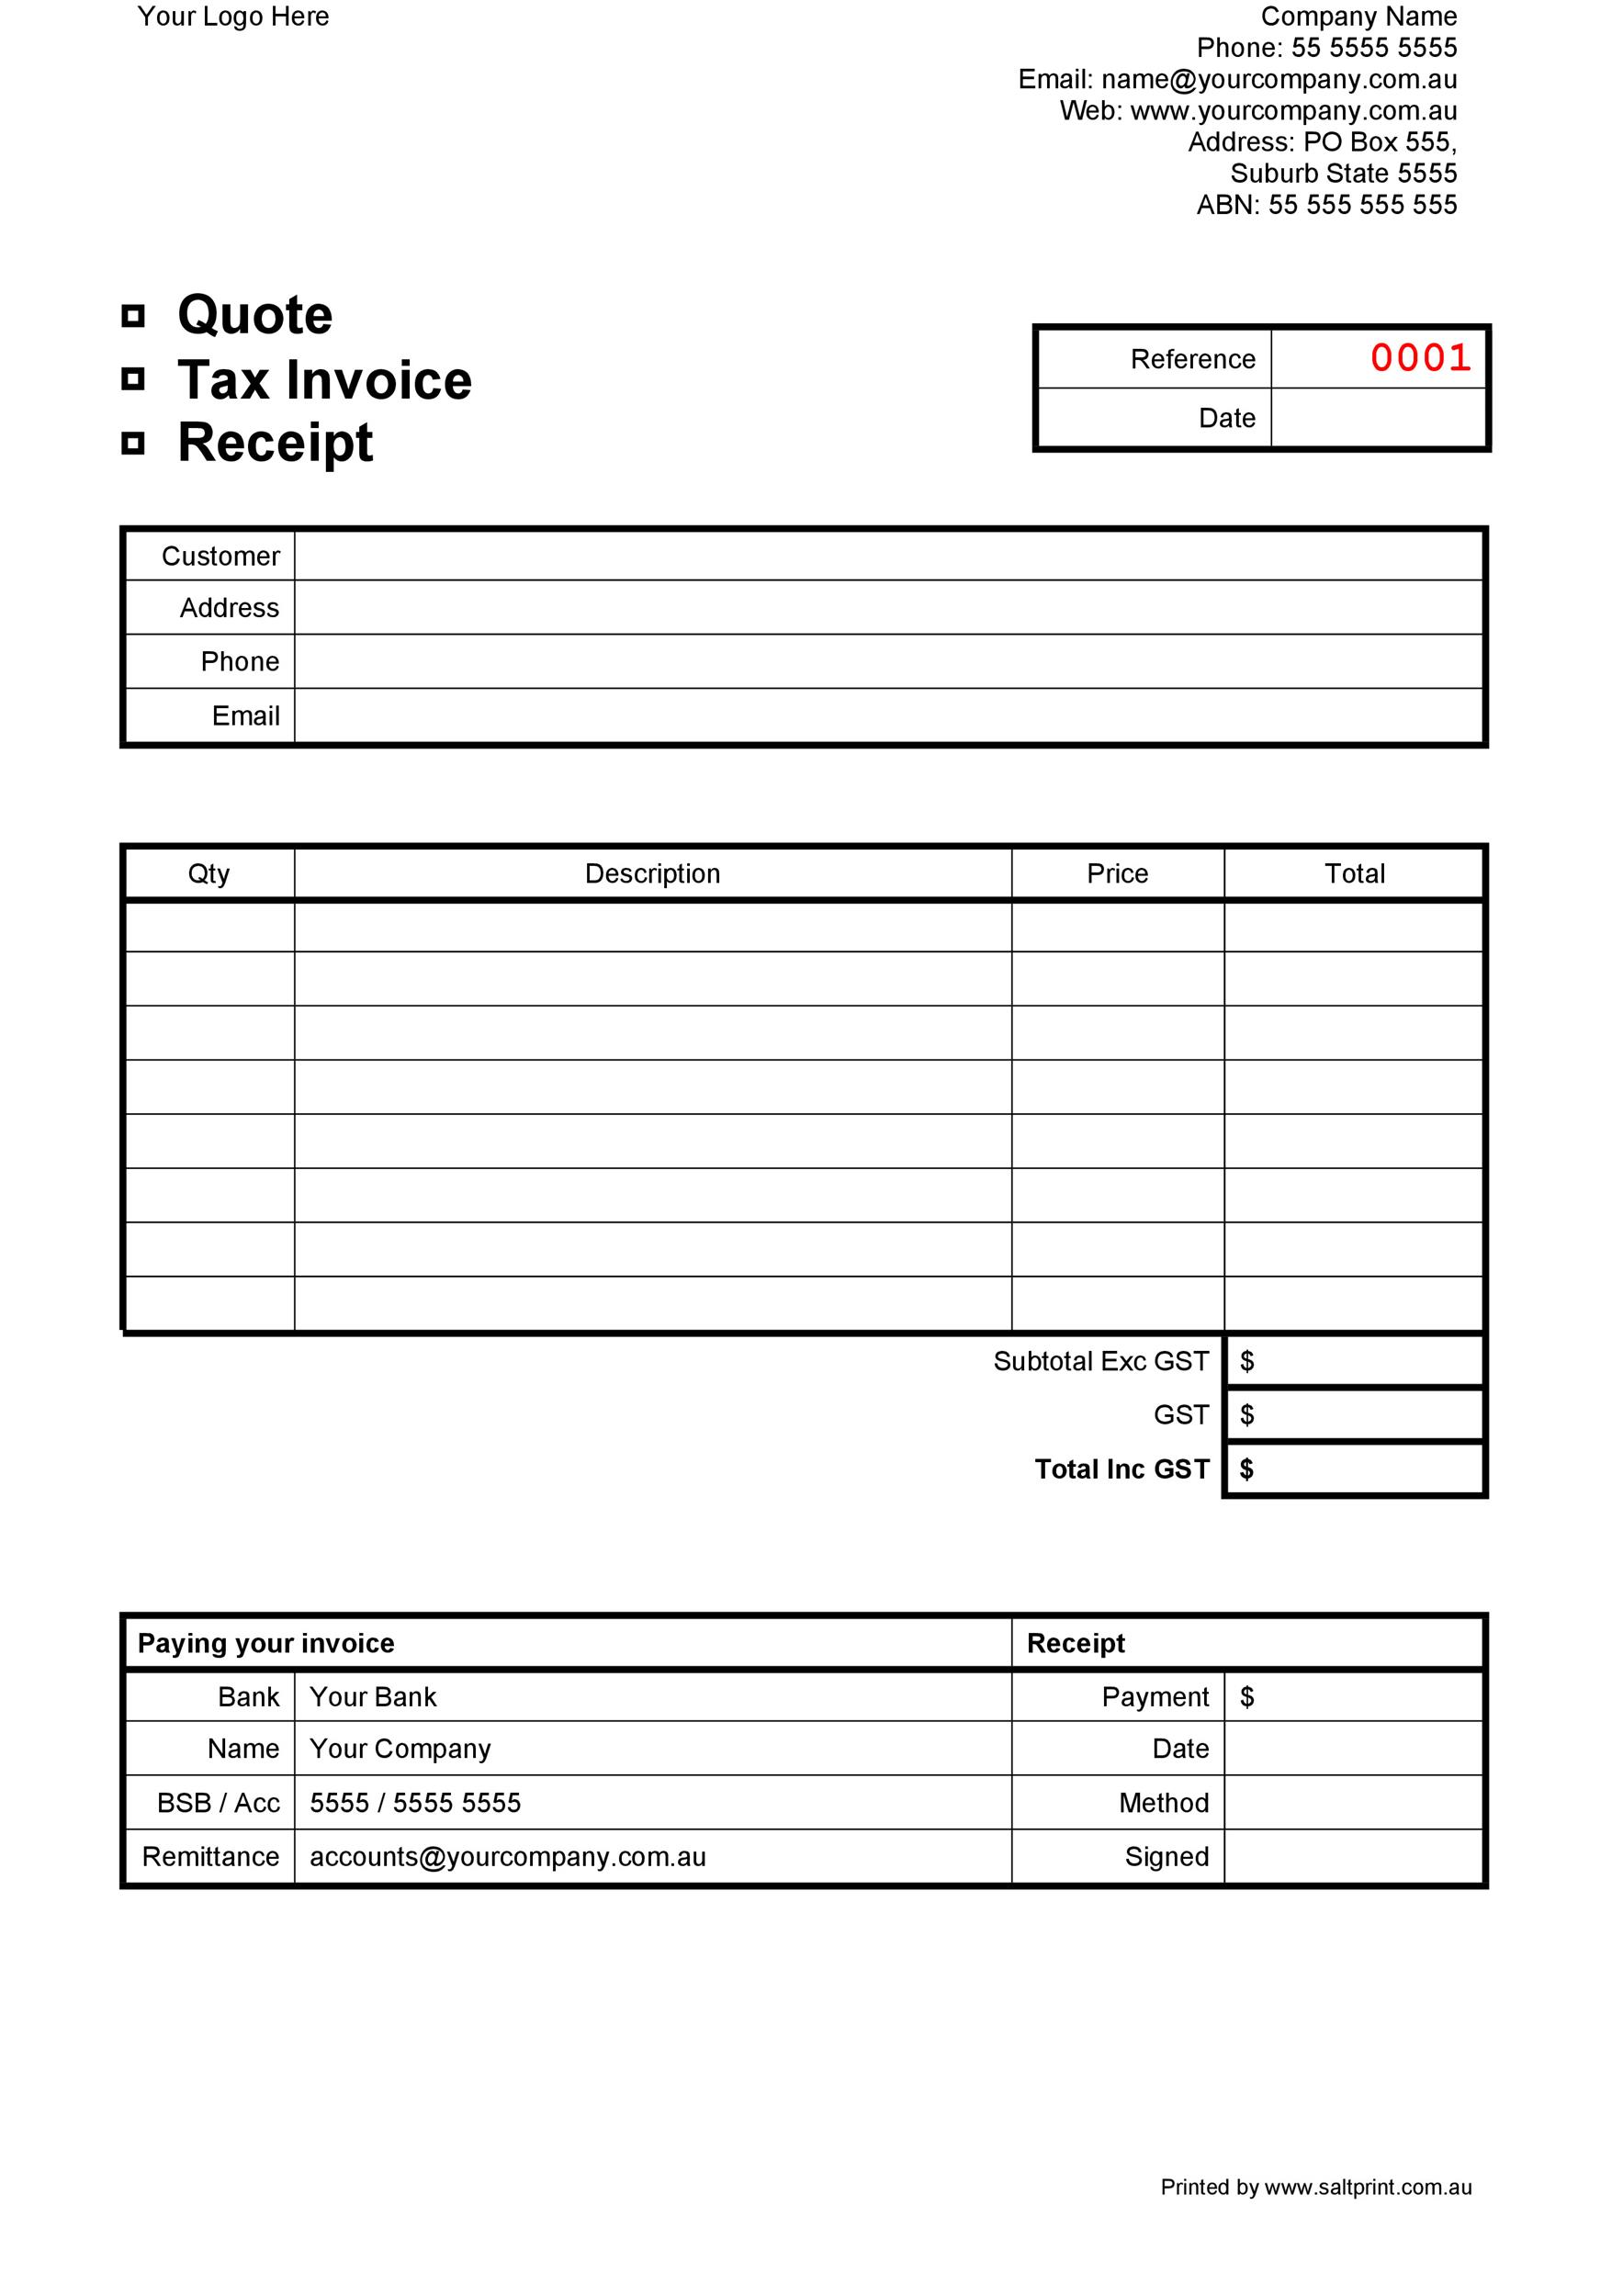 16-free-receipt-templates-download-for-microsoft-word-excel-and-google-sheets